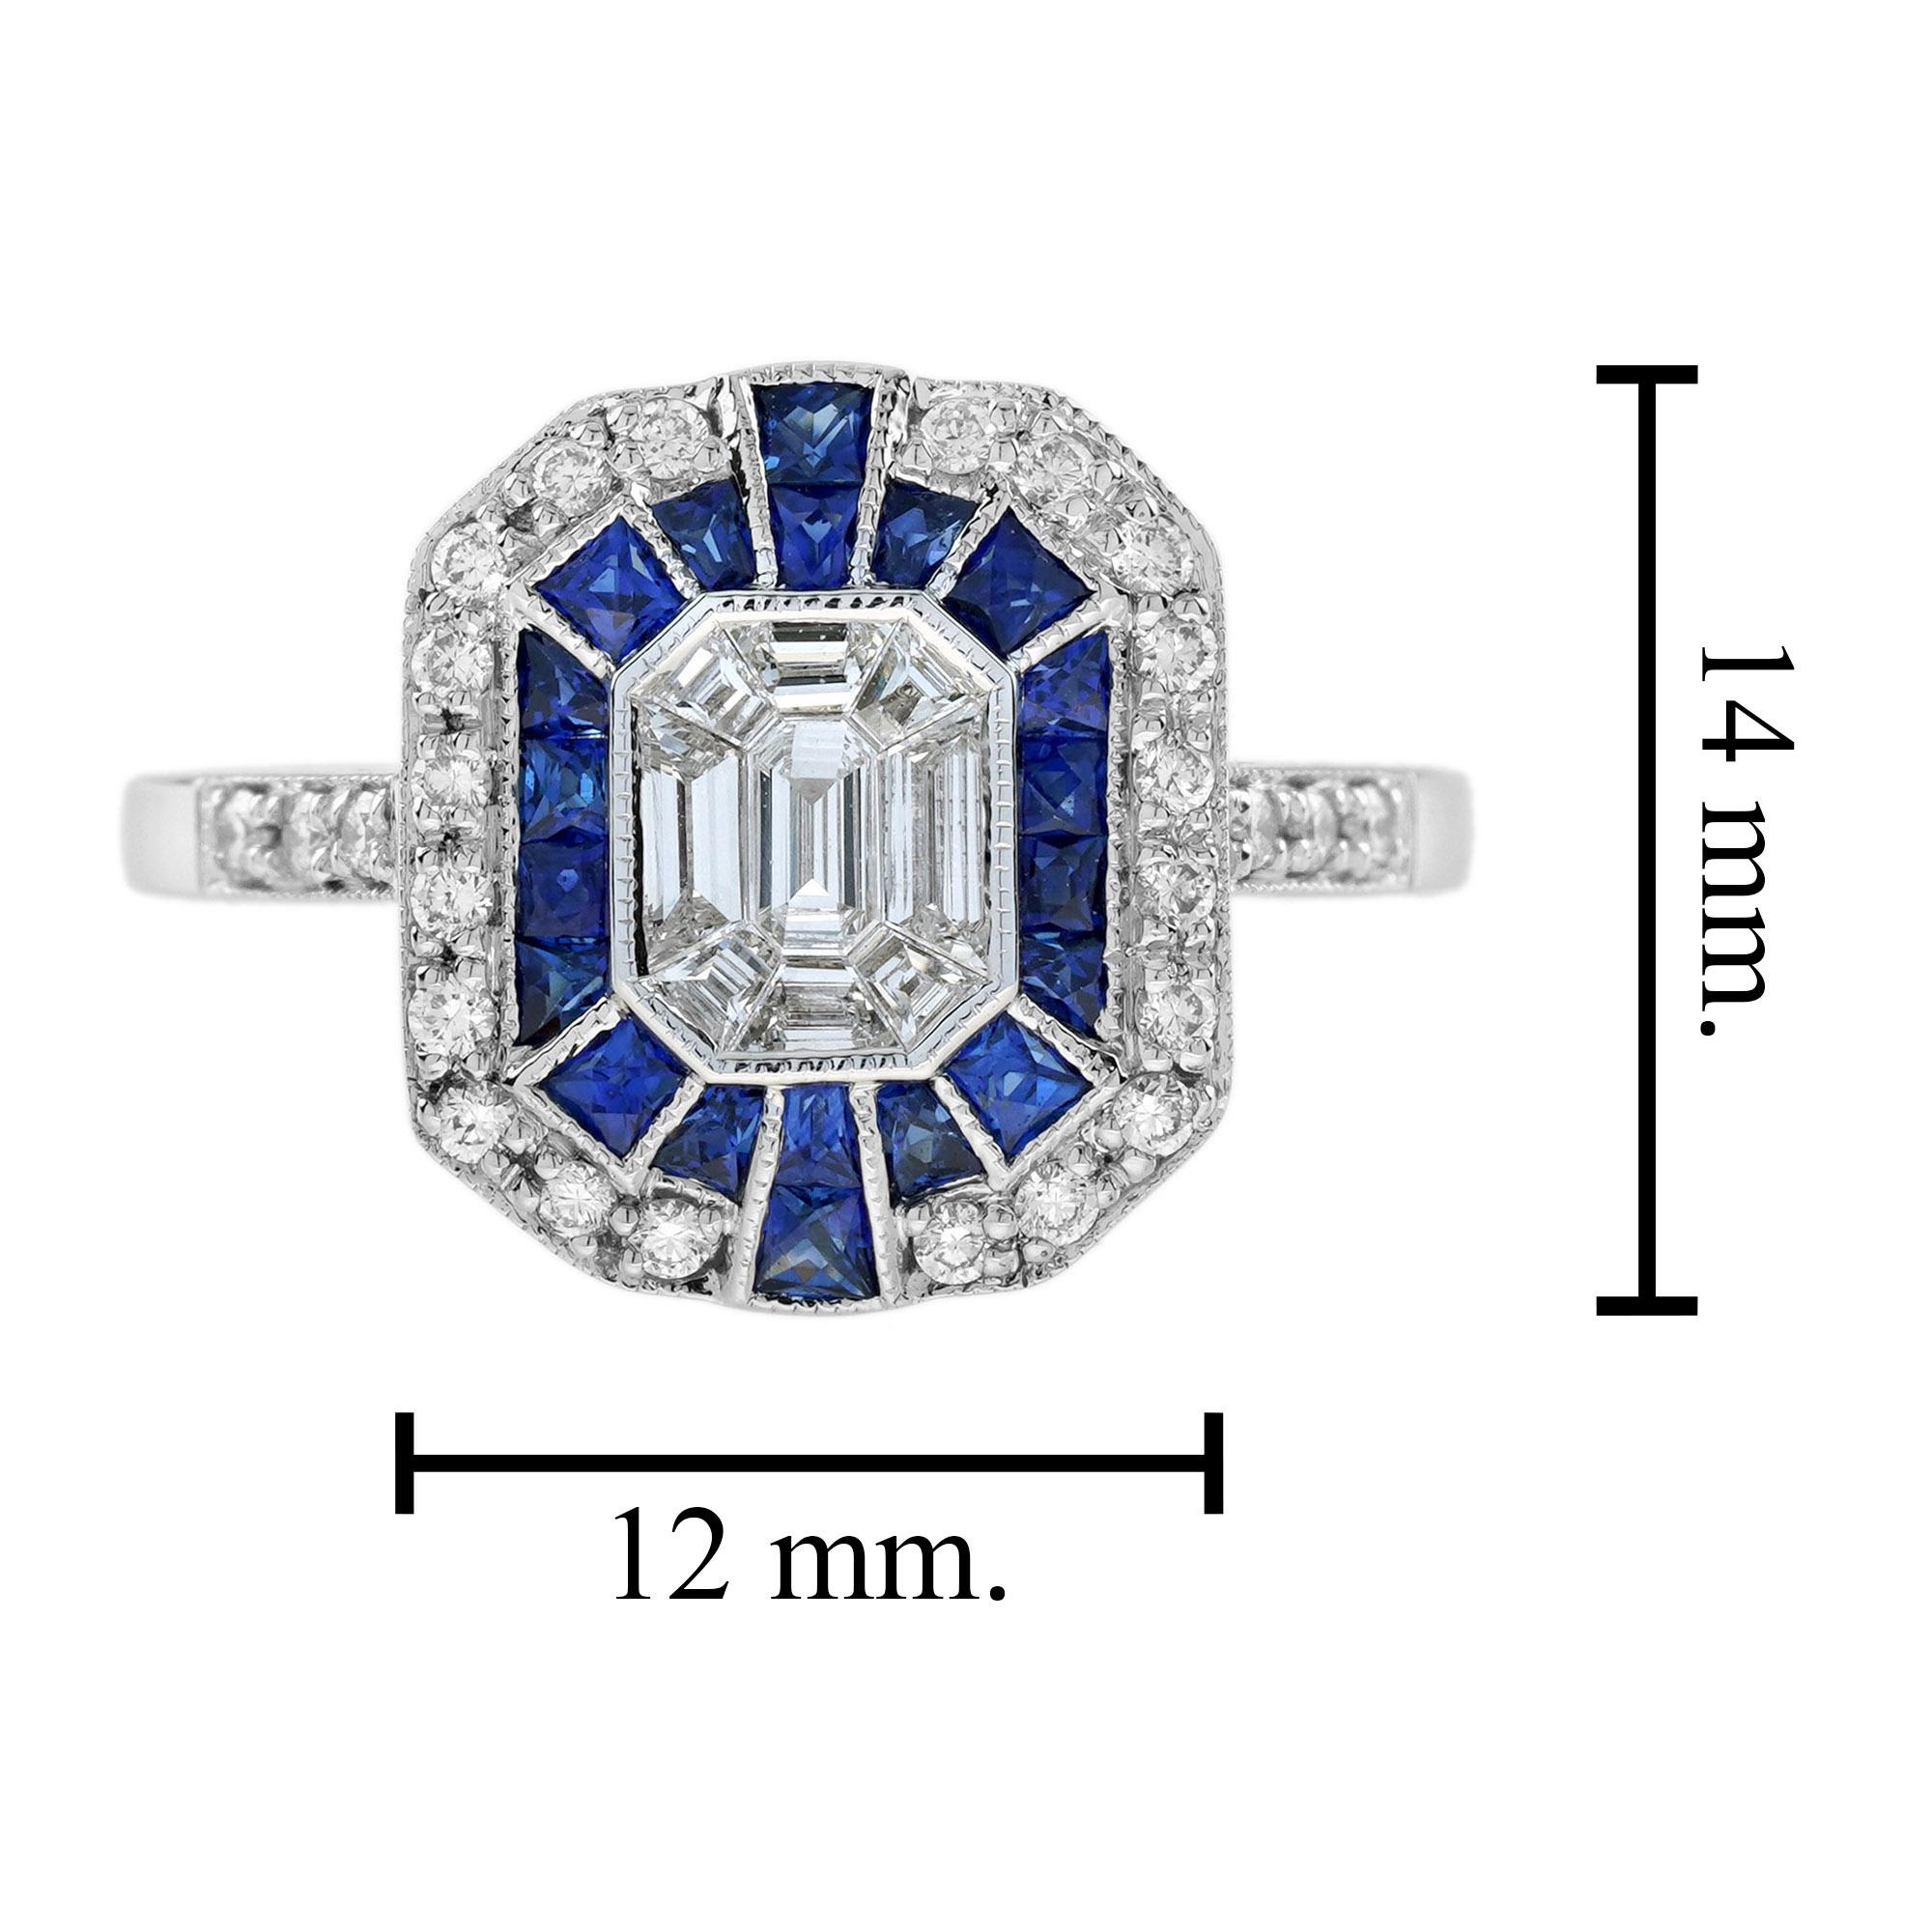 Illusion Set Diamond and Blue Sapphire Art Deco Style Ring in 18K White Gold 2